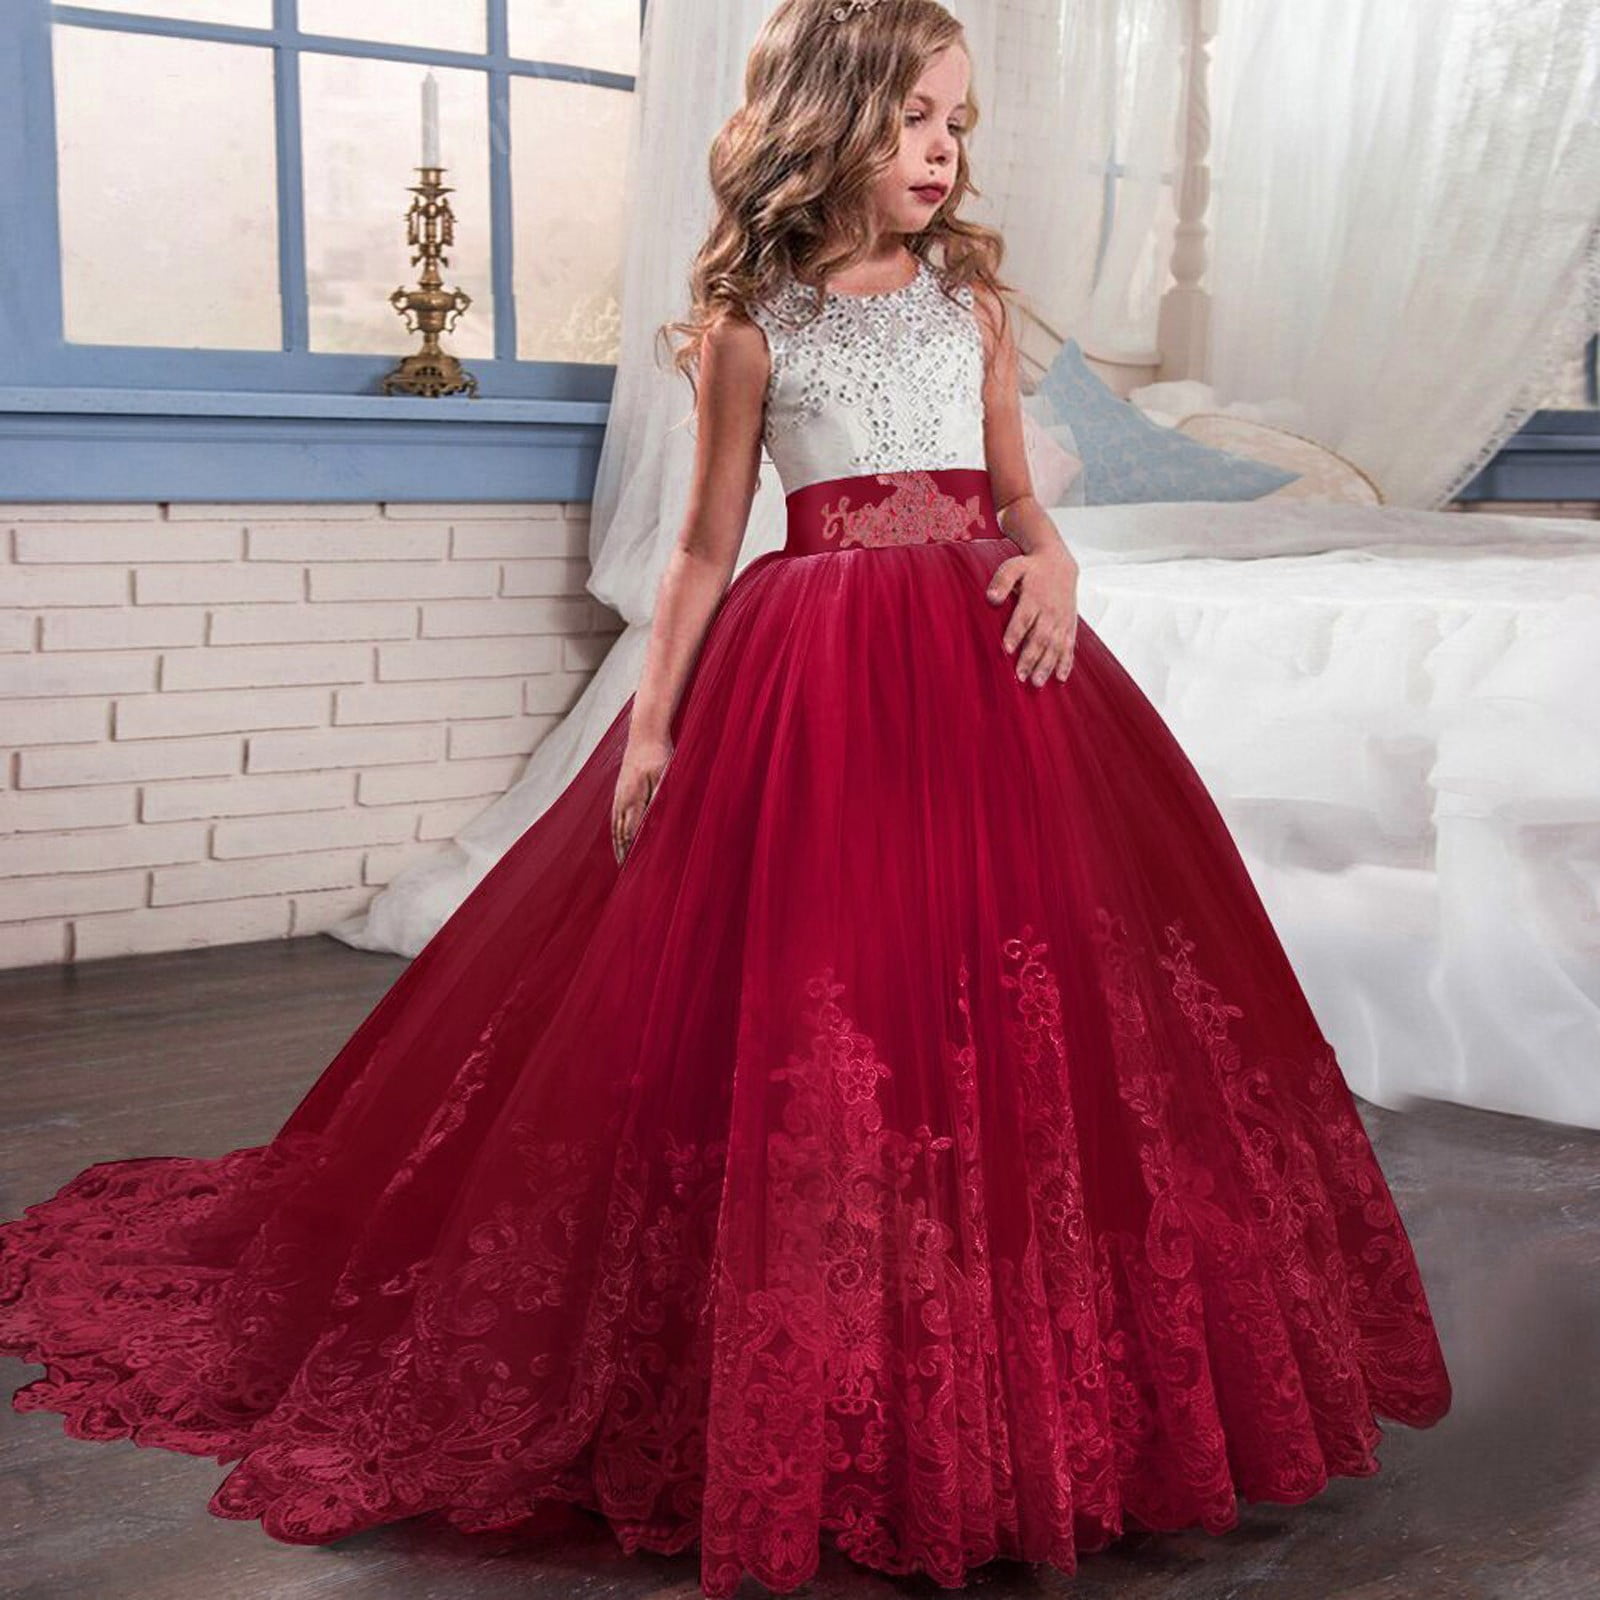 US$ 109.00] Pink Princess Ball Gown for Girls with Lace Appliqués -  lalamira | Peach flower girl dress, Flower girl dresses, Flower girl dress  lace